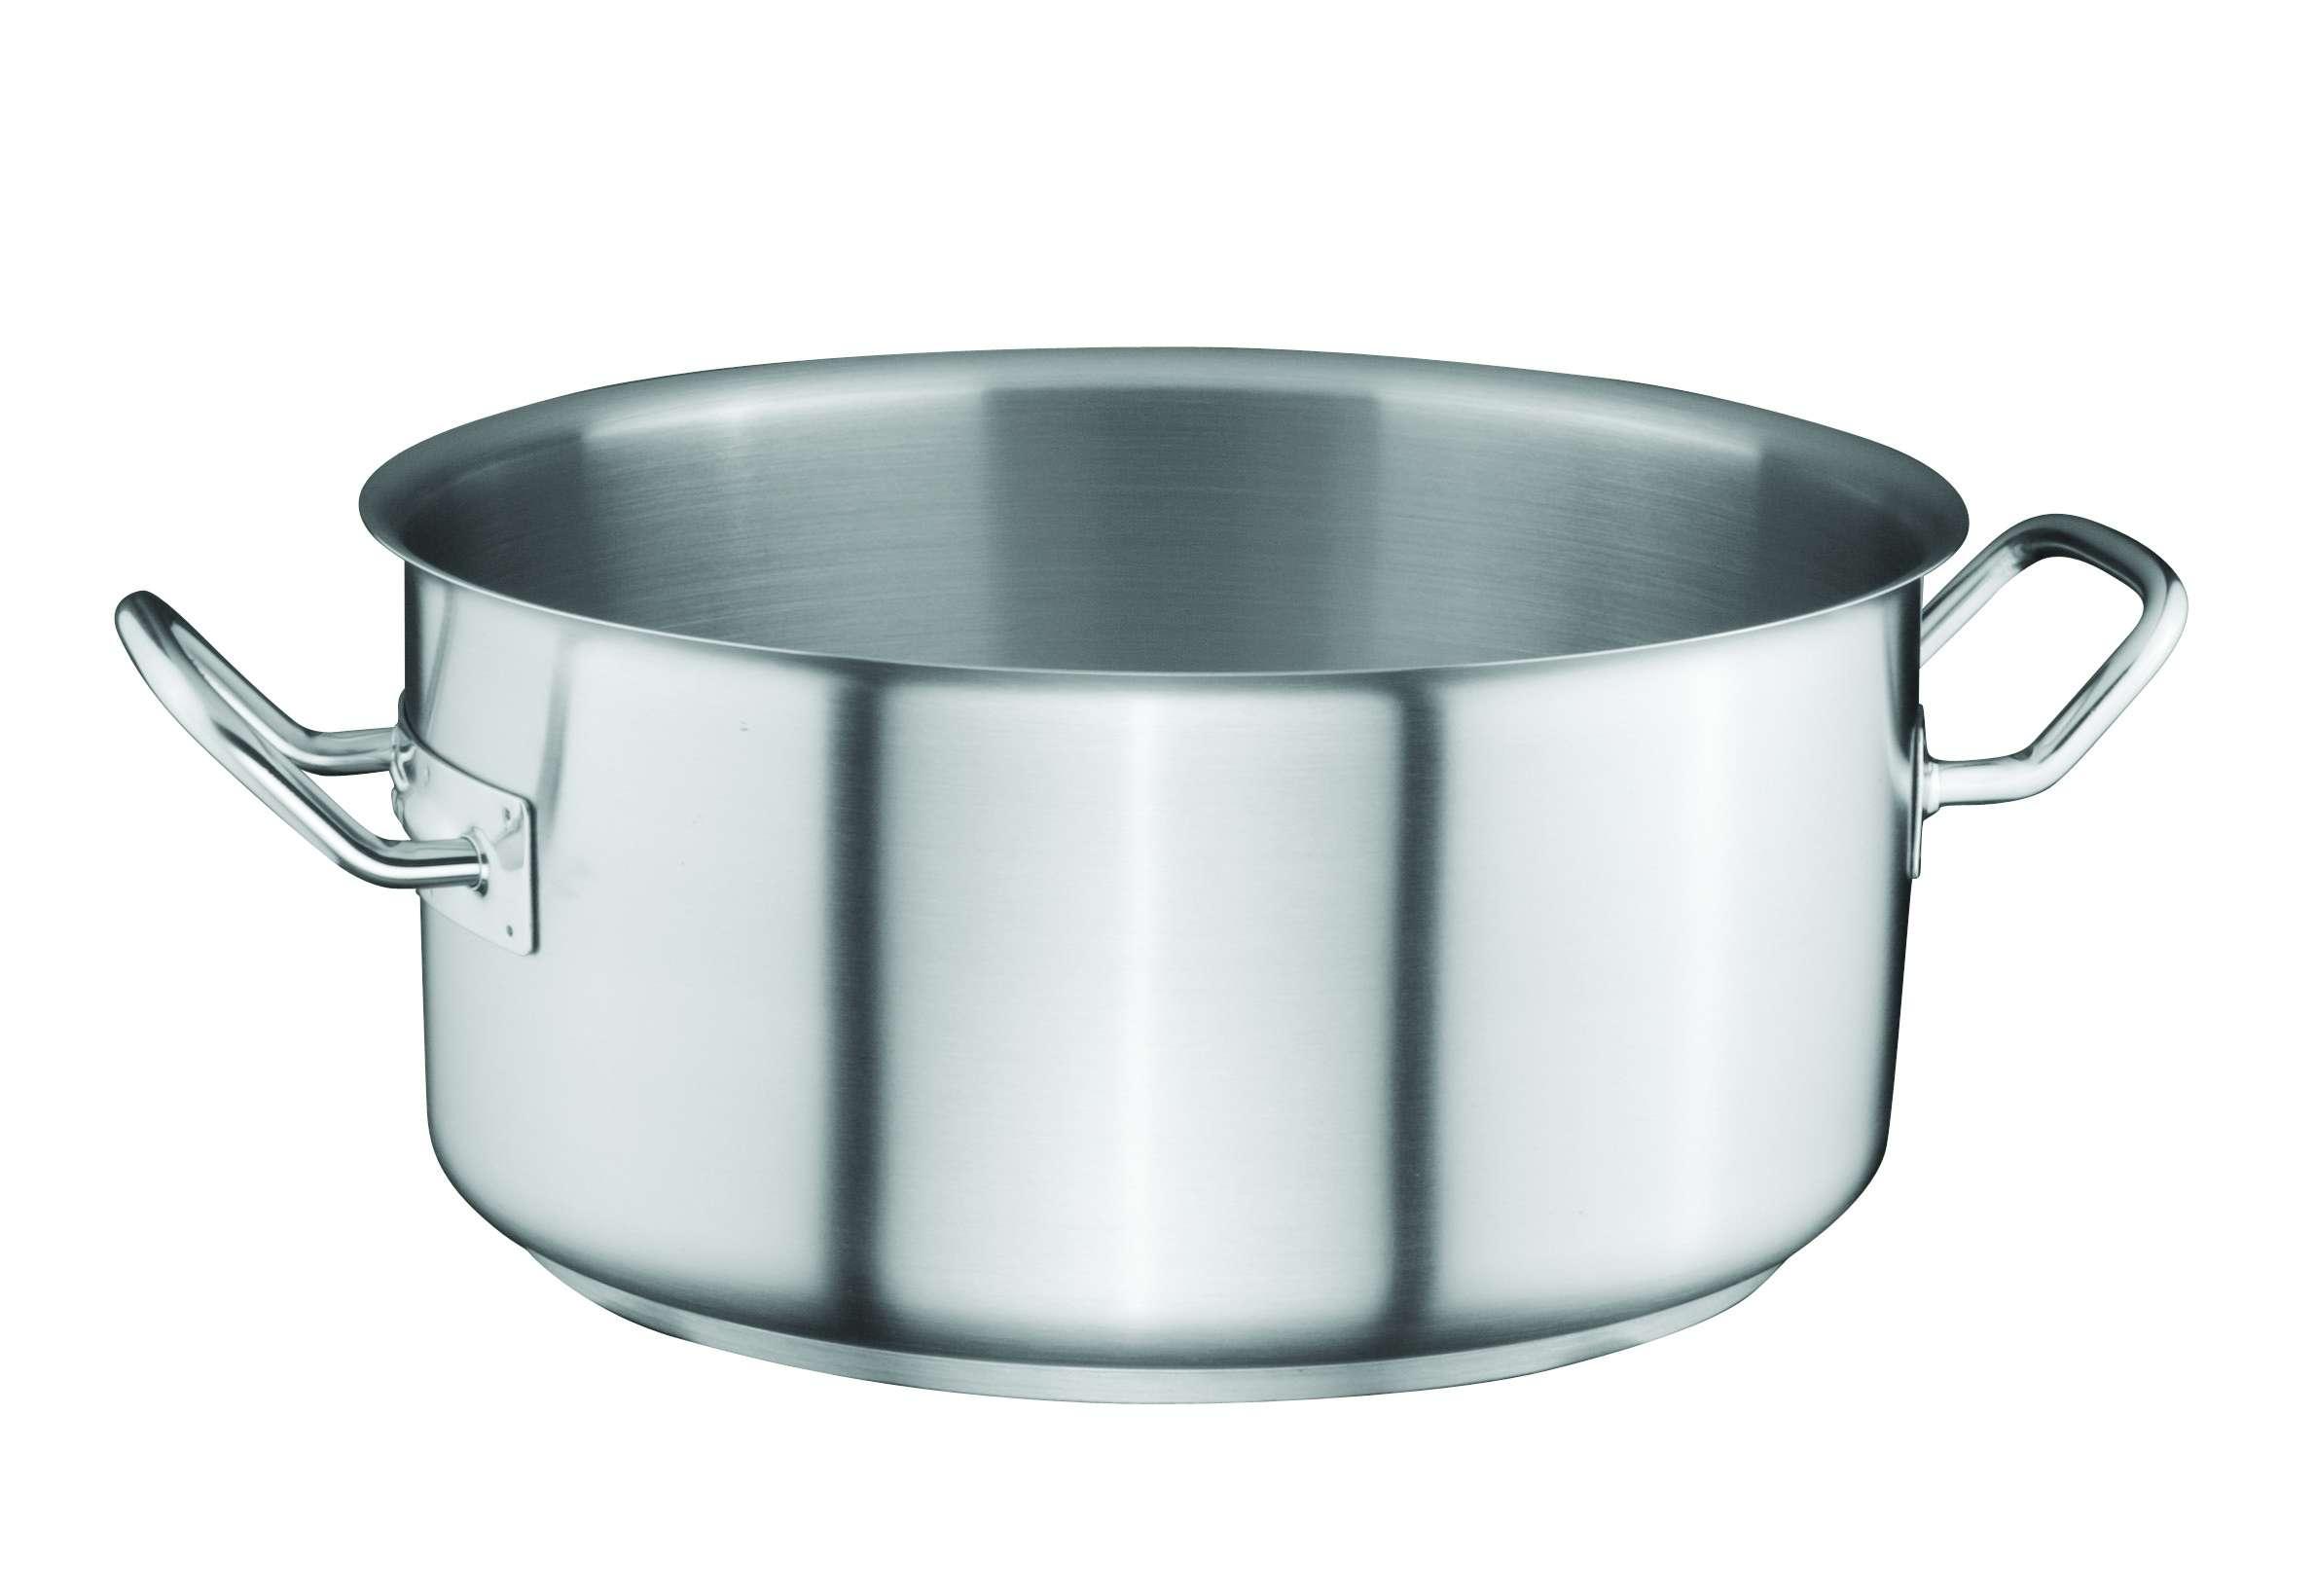 Ozti Stainless Steel Casserole Pot 32 cm x 15 cm Silver Stainless Steel